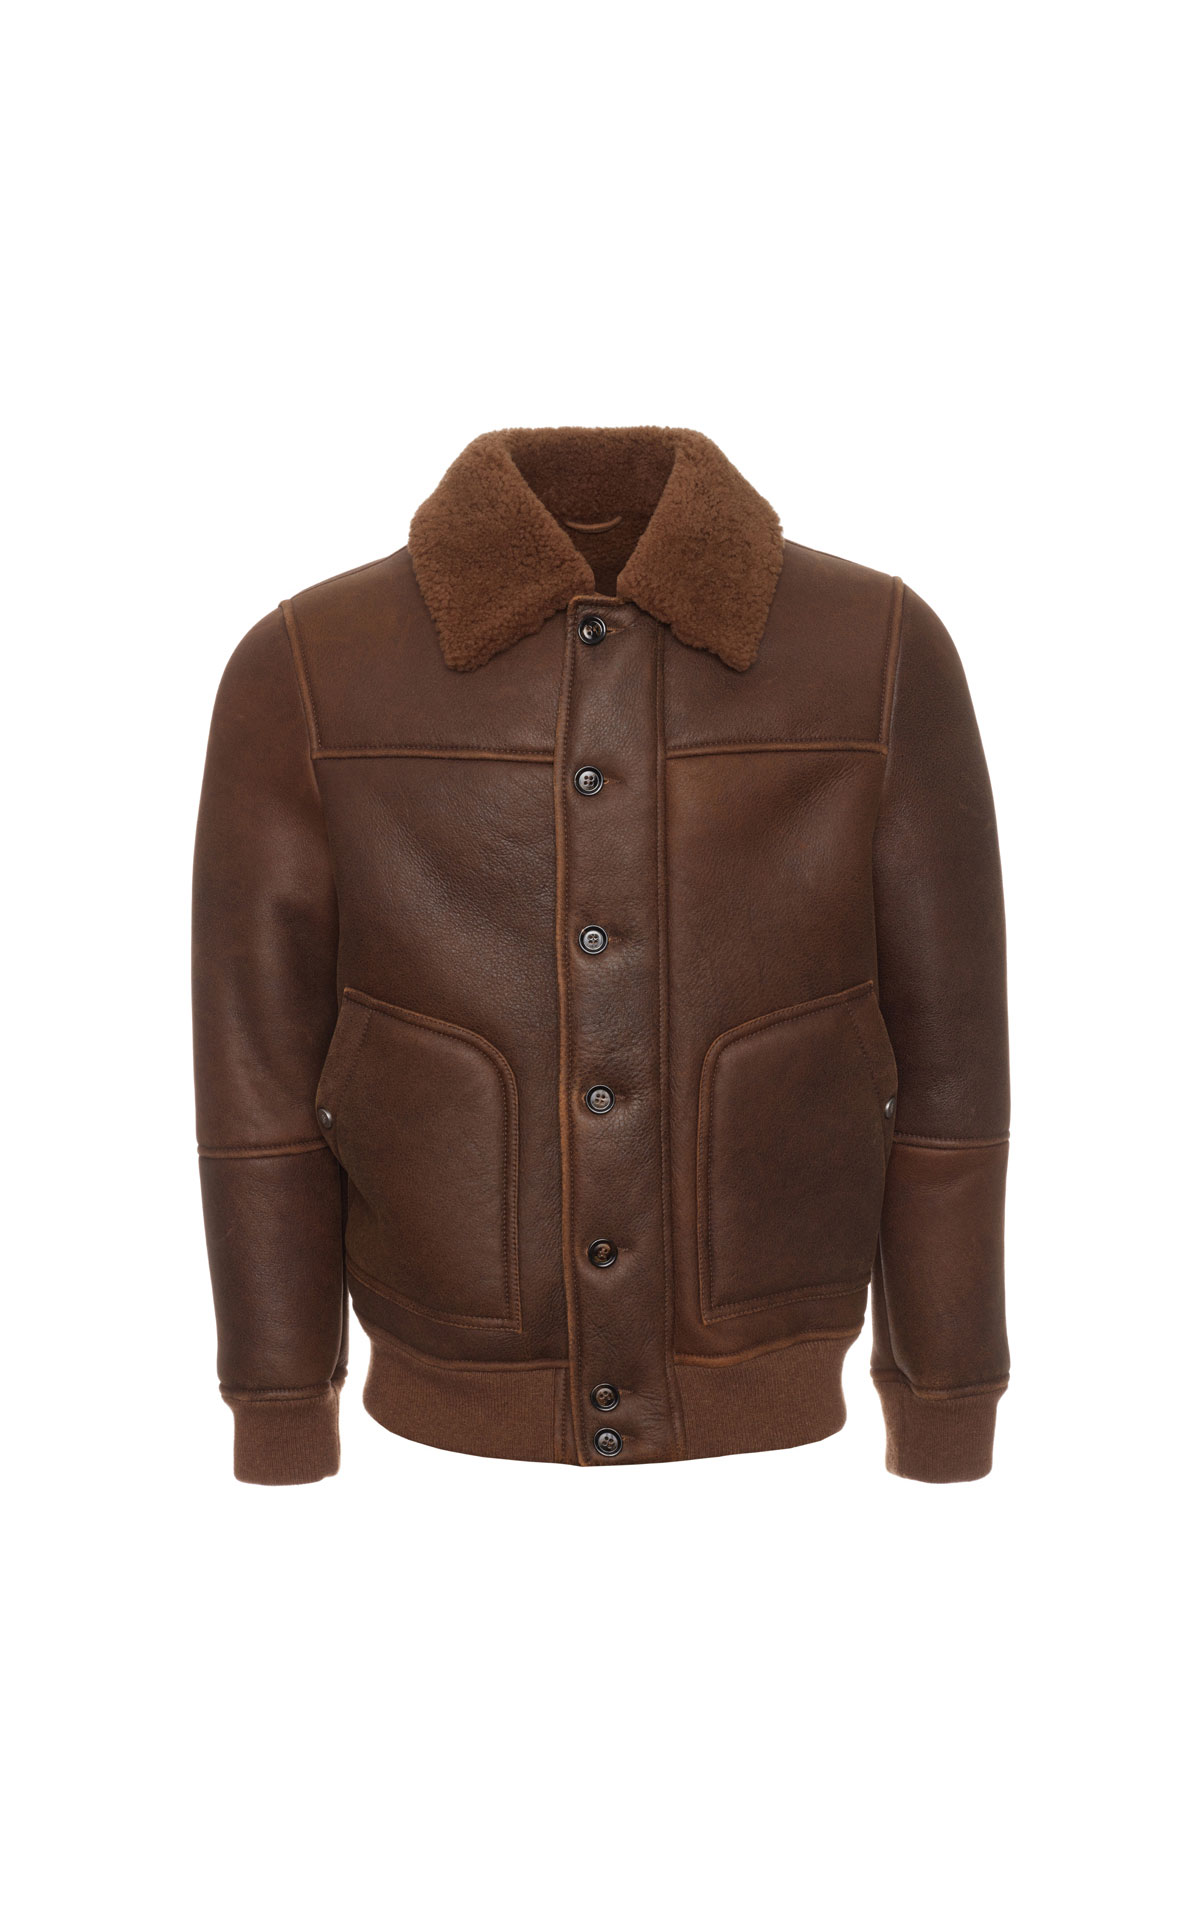 Eleventy Brown shearling jacket from Bicester Village